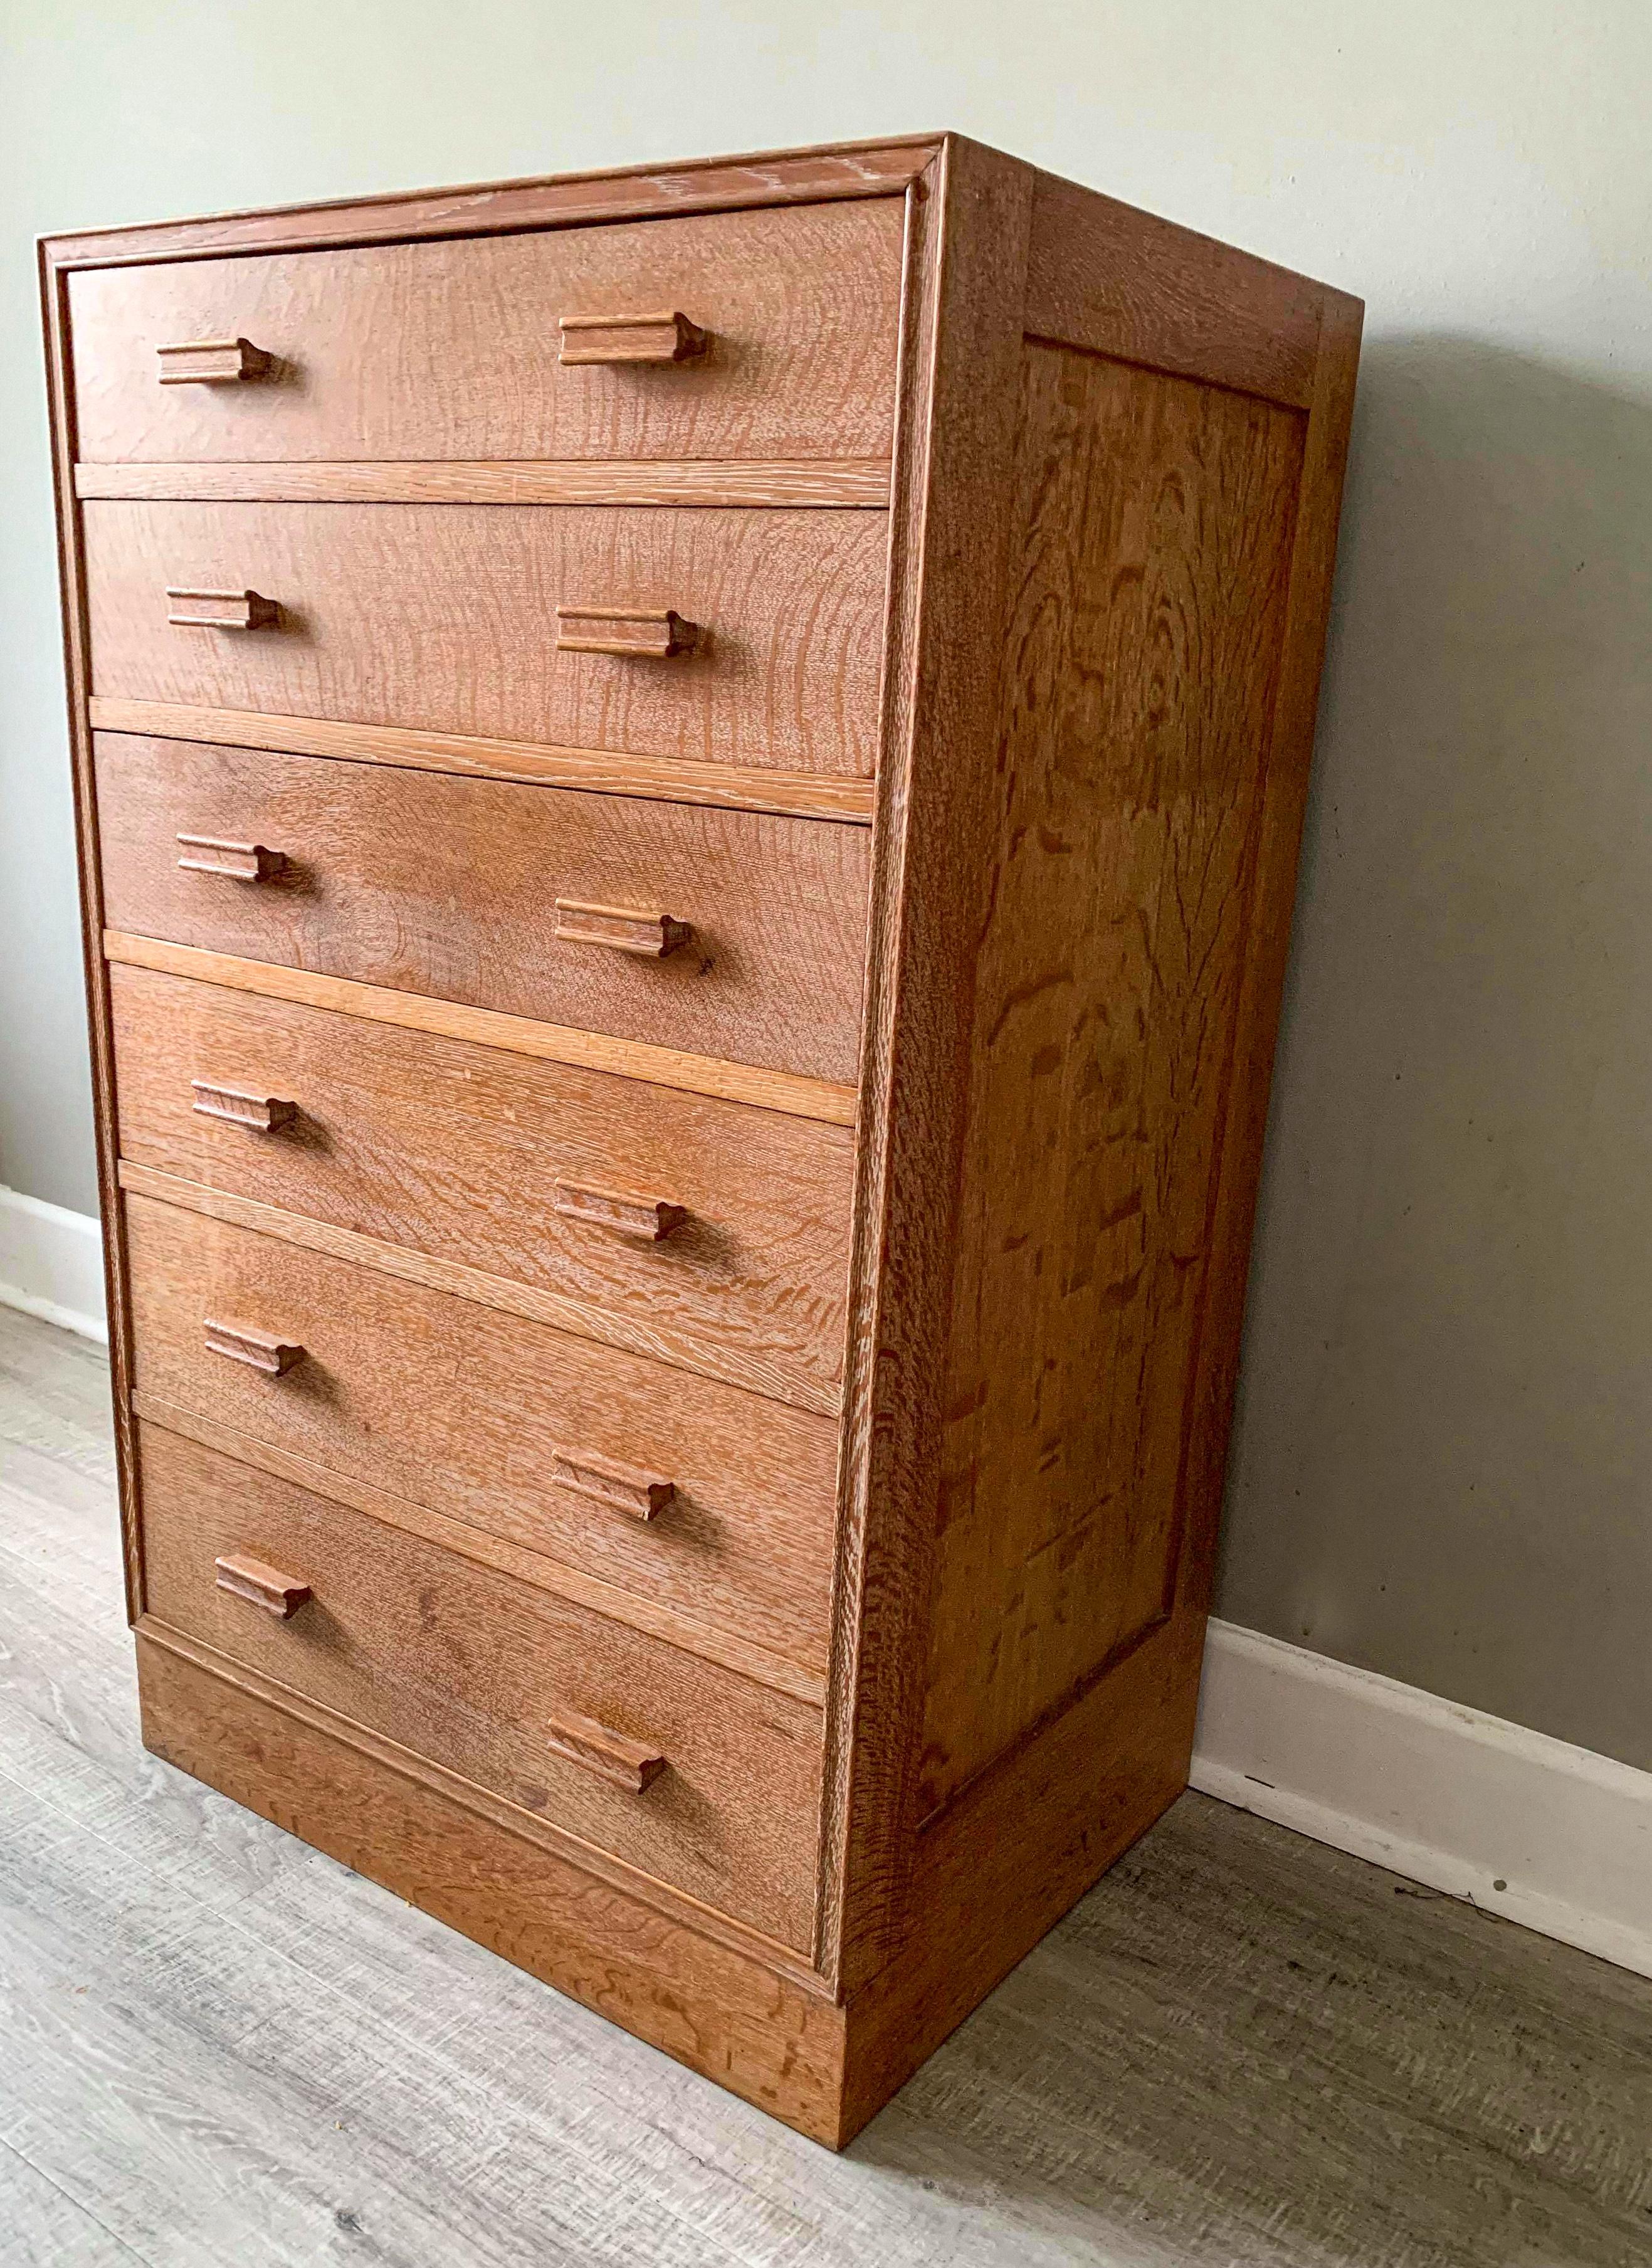 Original Arts & Crafts piece by Heals of London limed oak finish
Tall boy chest of drawers consisting of 6 graduating drawers.
Fabulous piece very rare.
Condition is good with wear in all the right places.
 